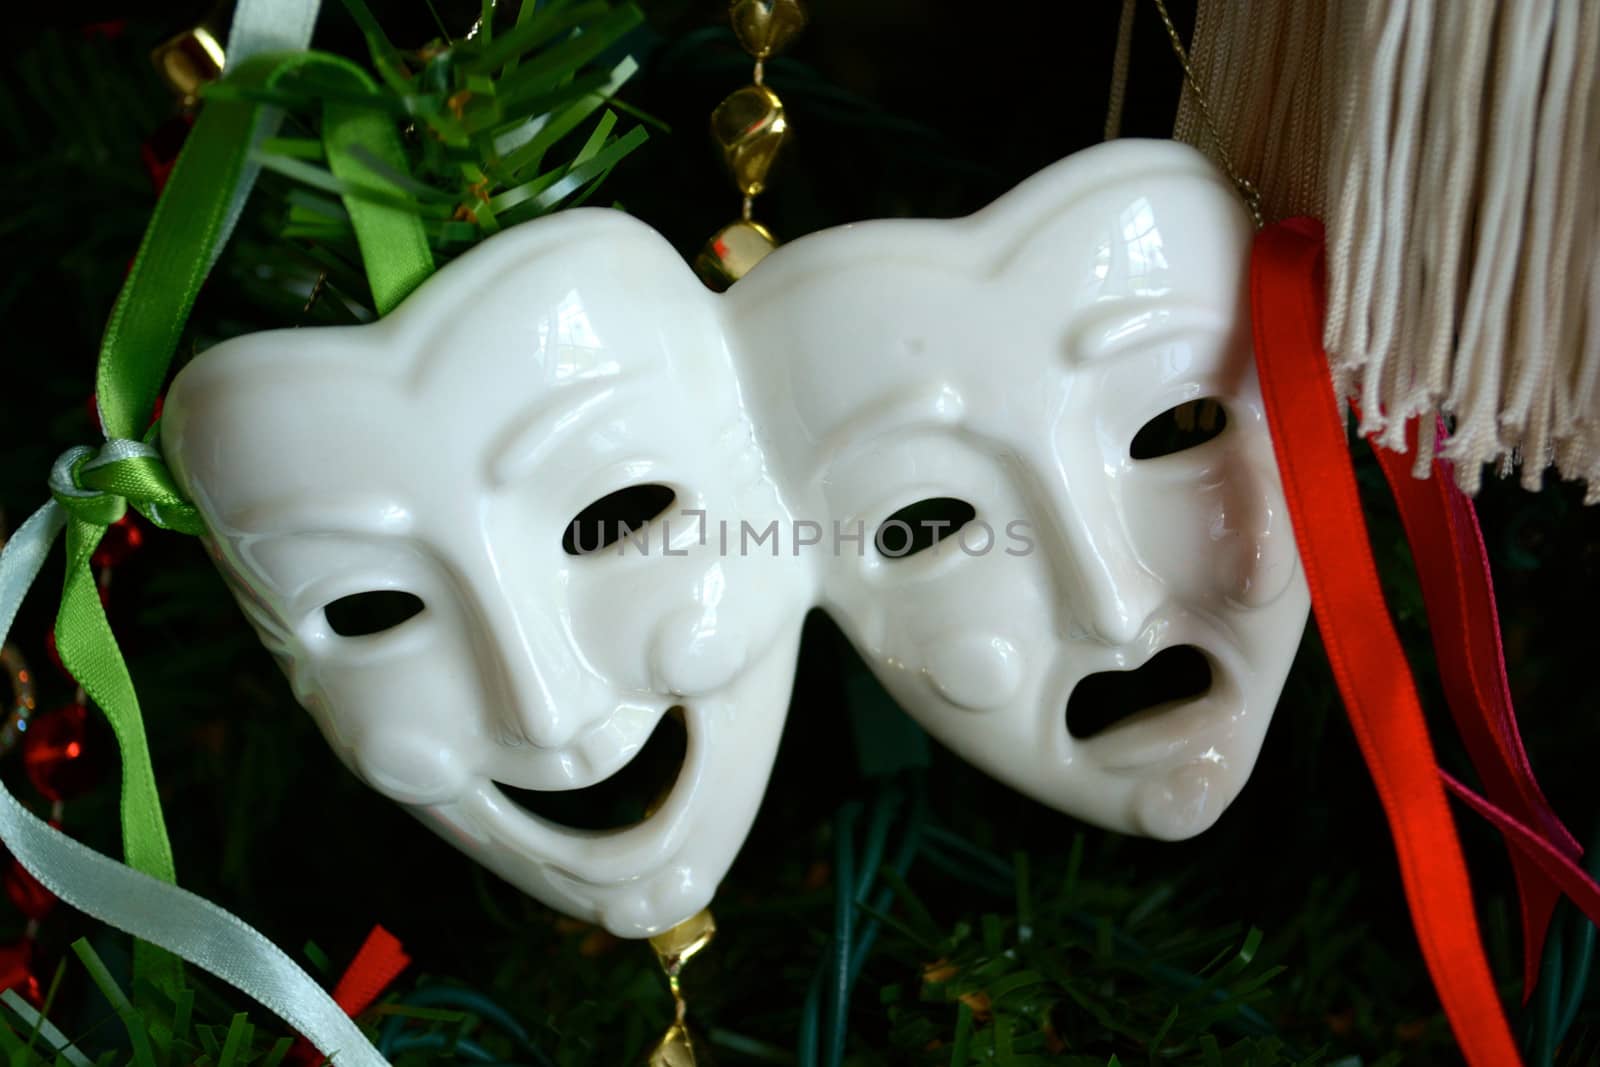 Theatre Mask Ornament hangs on a Christmas Tree